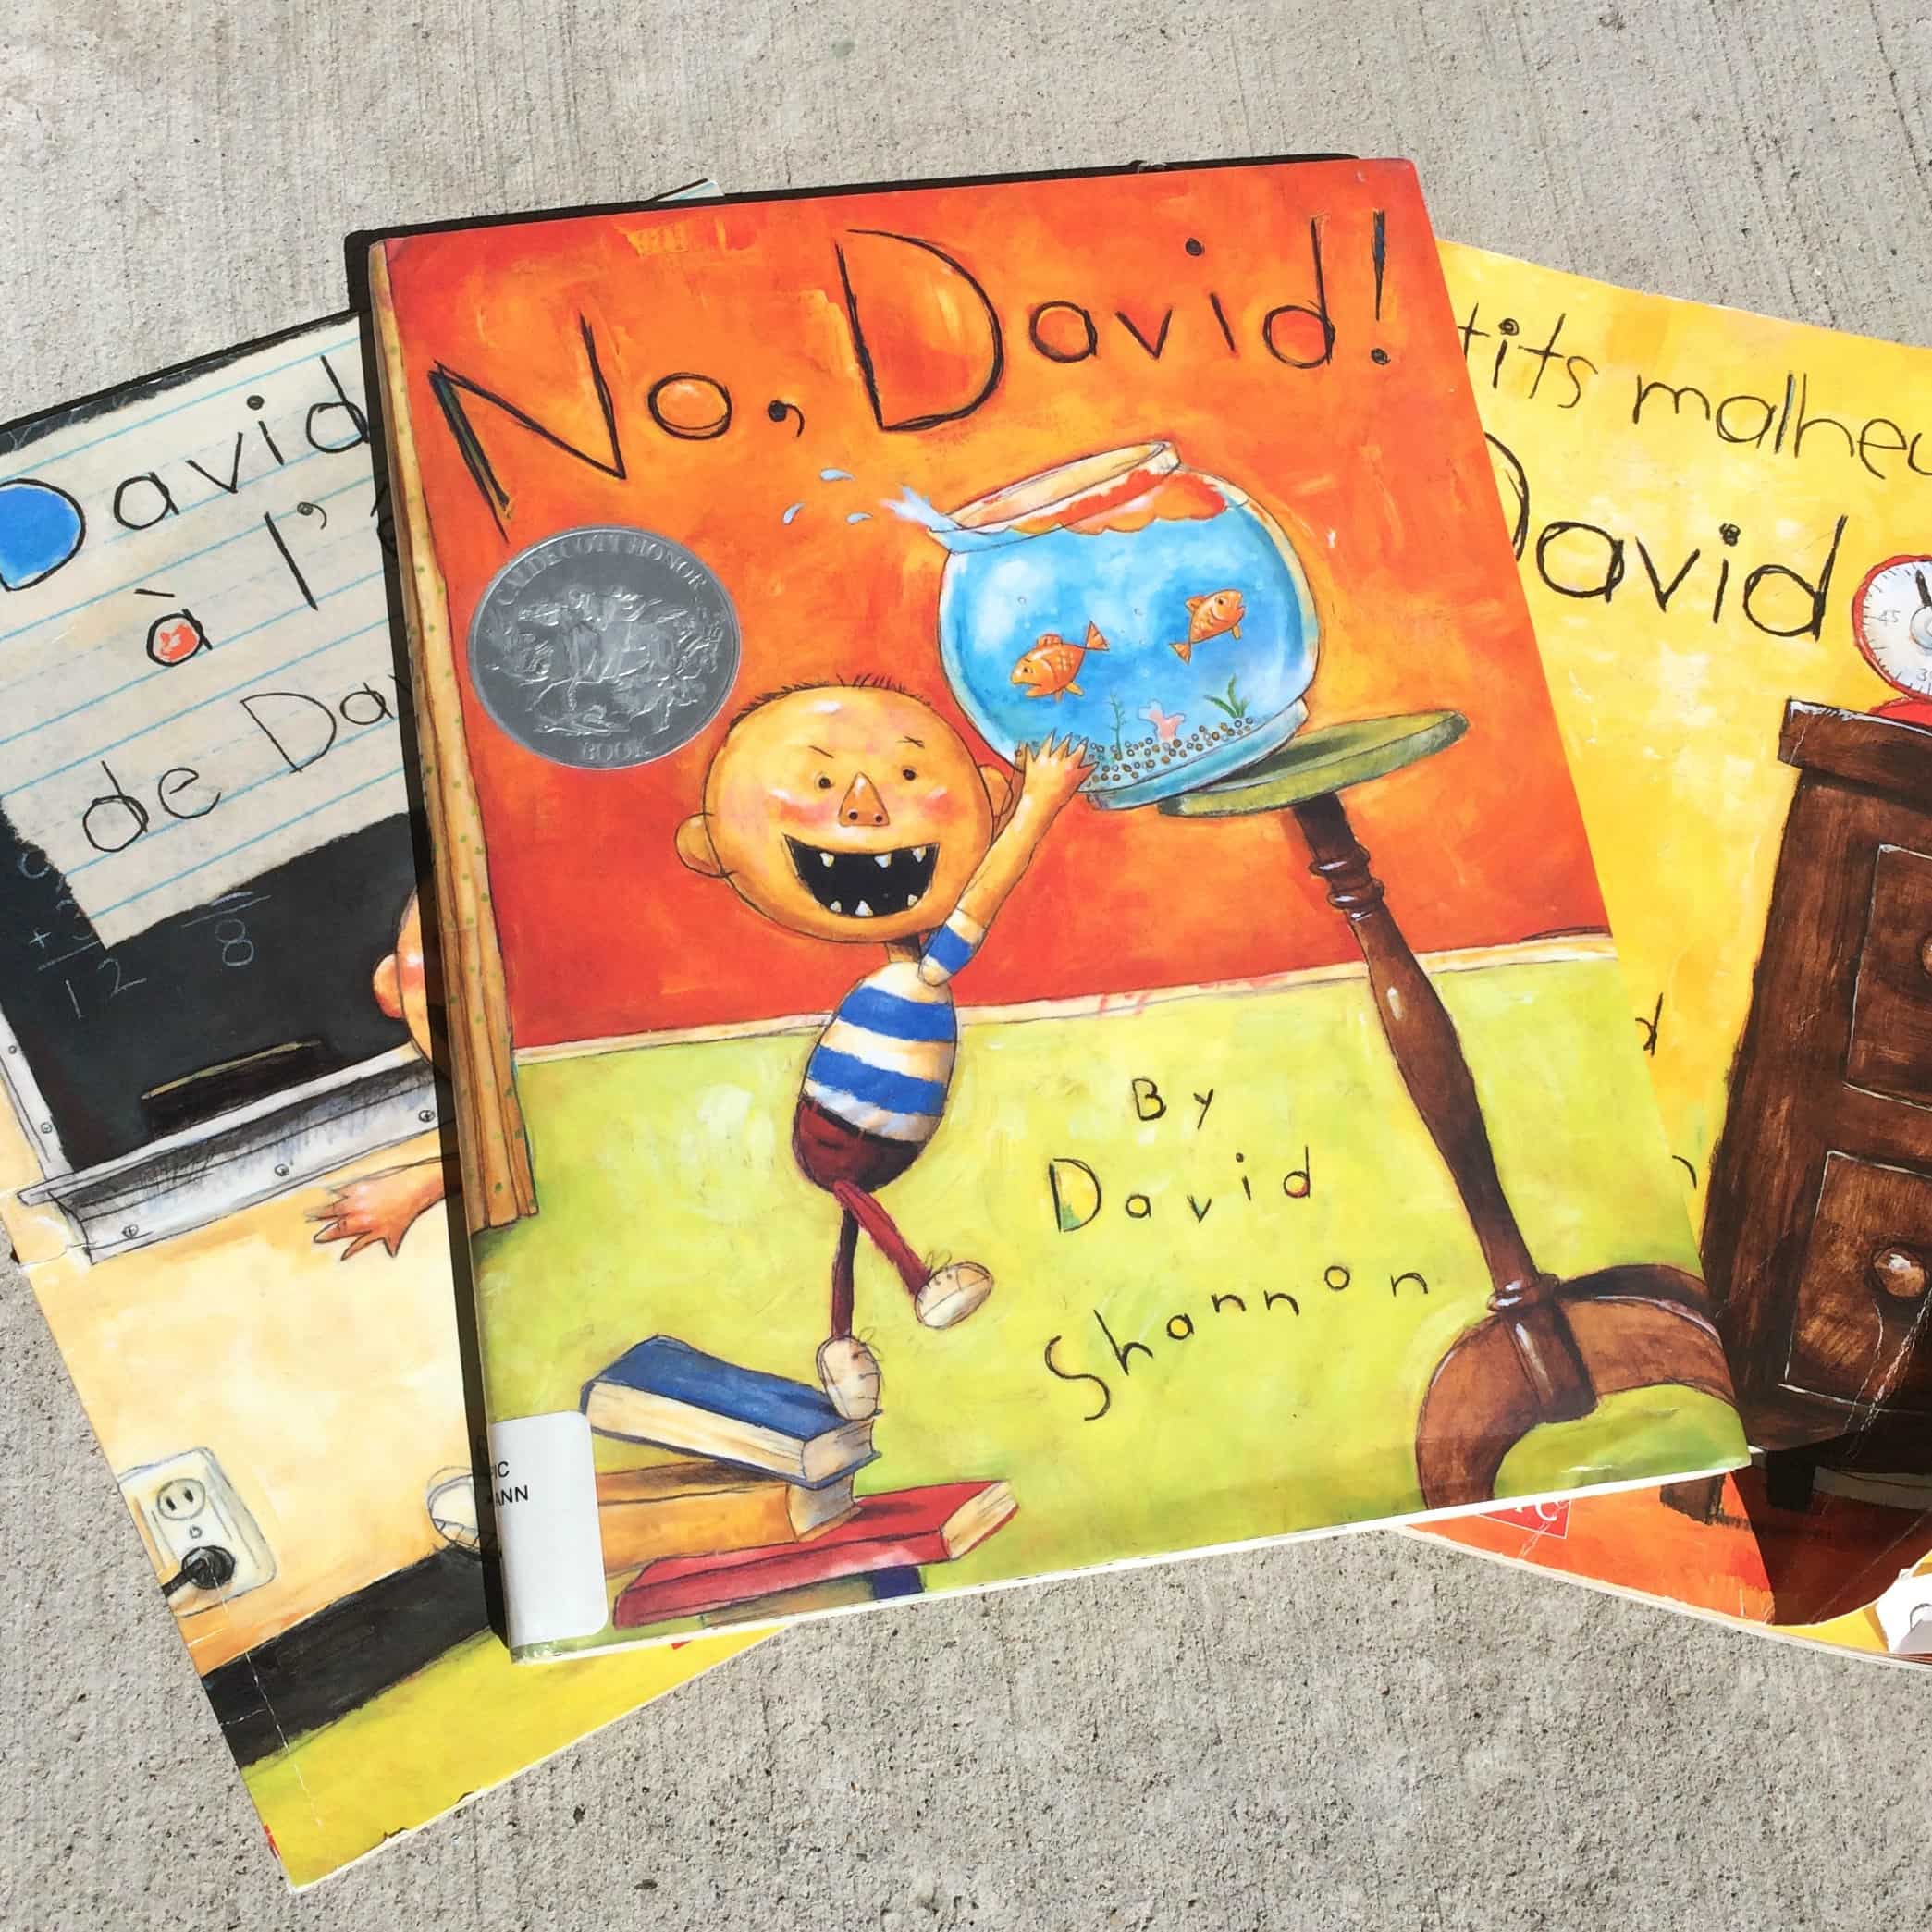 Best books for a spirited child No David by David Shannon